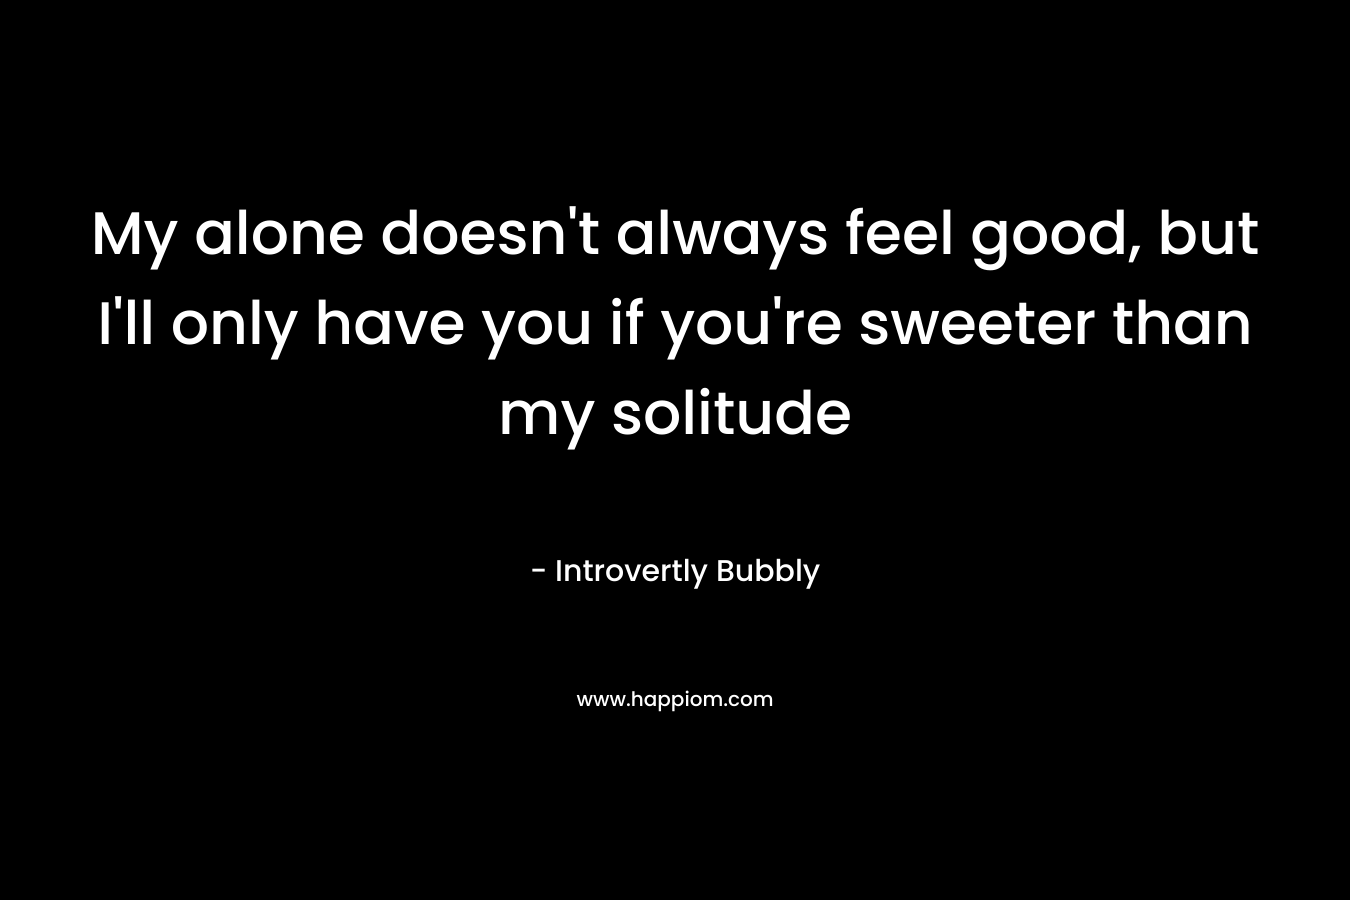 My alone doesn’t always feel good, but I’ll only have you if you’re sweeter than my solitude – Introvertly Bubbly